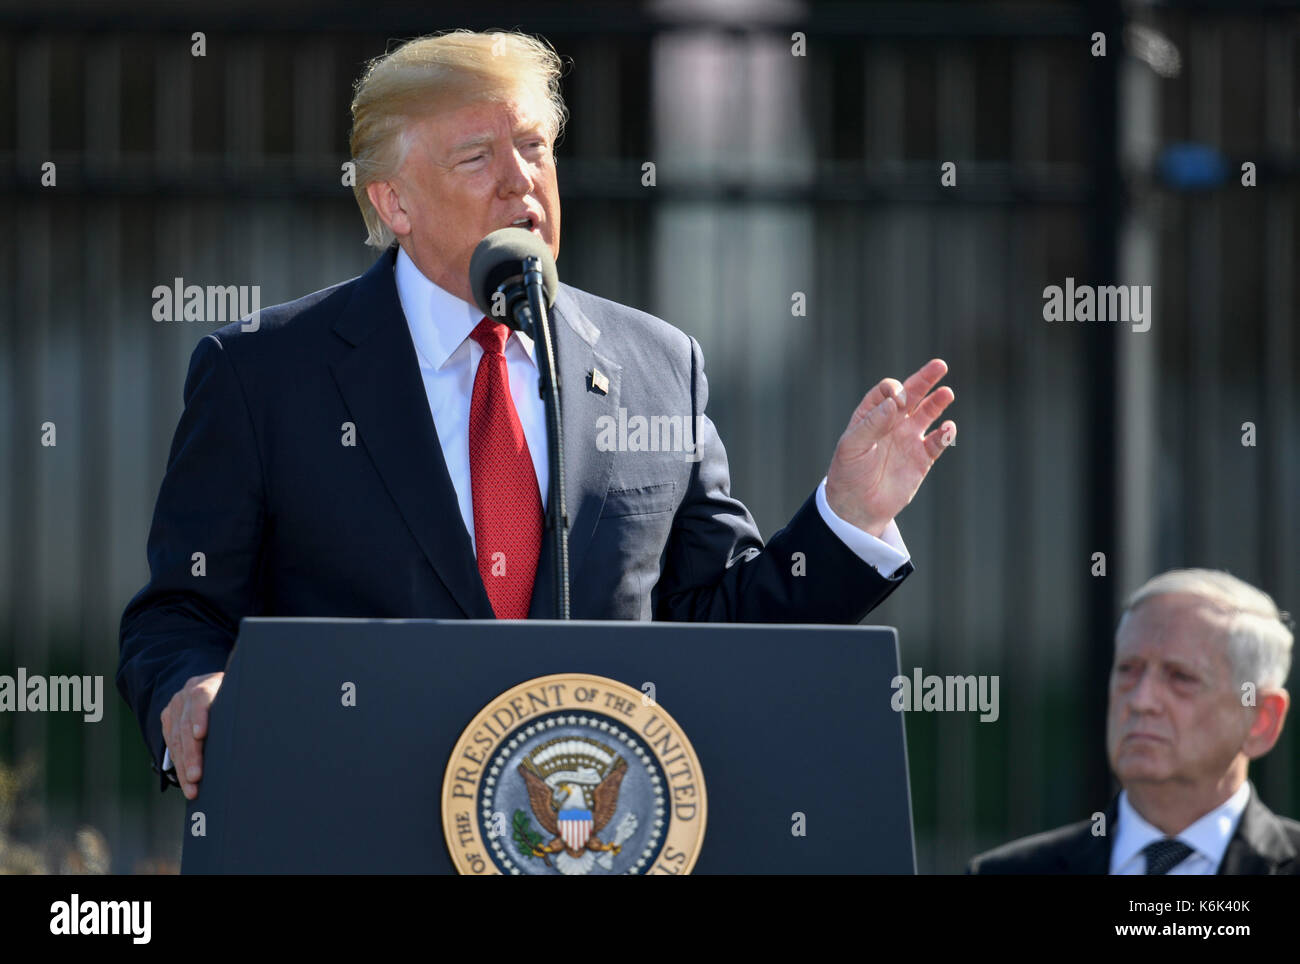 President Donald Trump speaks during the 9/11 Observance Ceremony at the Pentagon in Washington, D.C., Sept. 11, 2017. Stock Photo